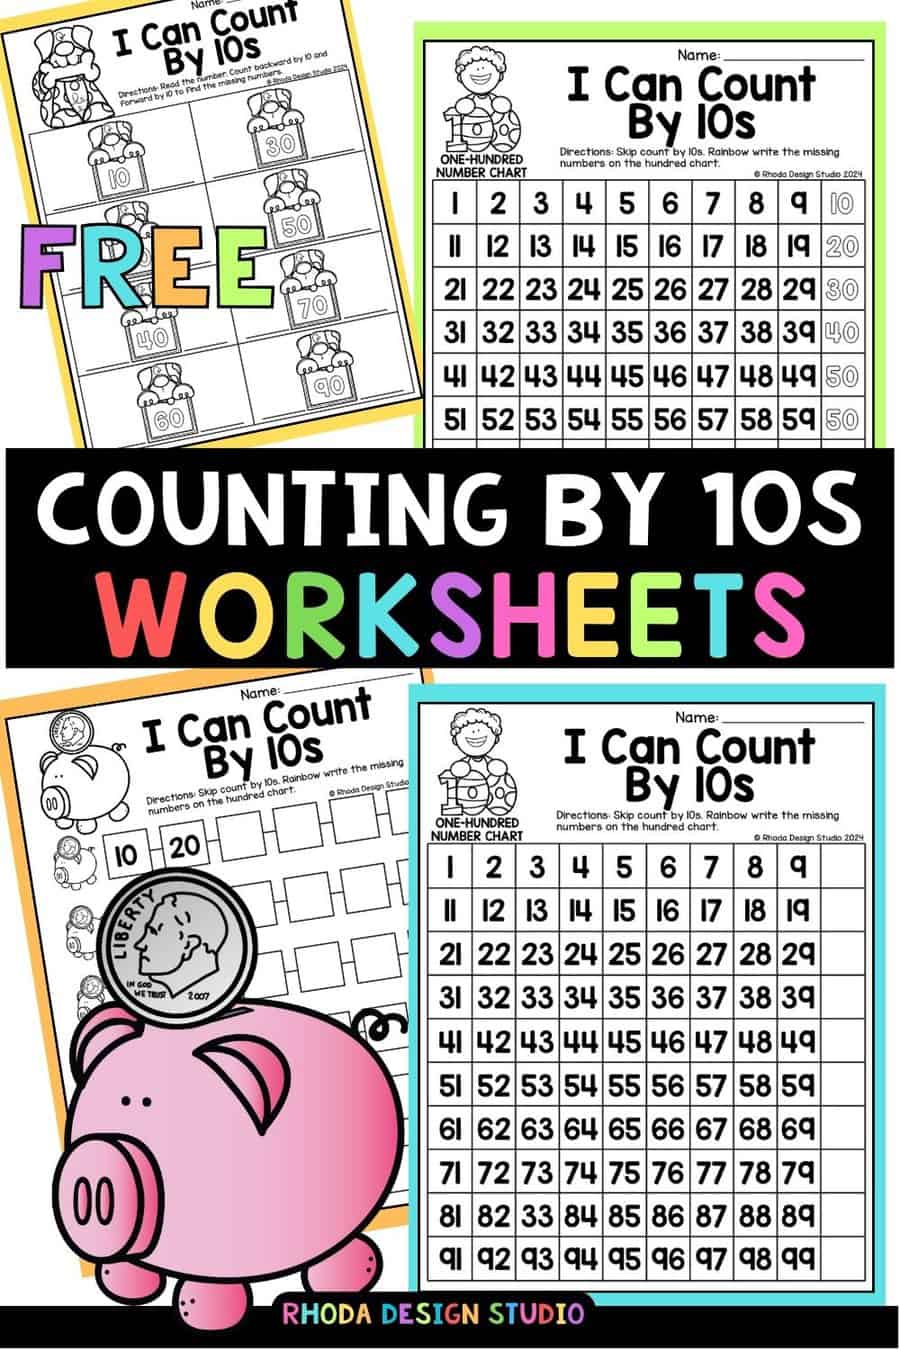 Free Math Worksheets for Pre-K, Kindergarten and First! There are plenty of free of printable worksheets available for any child's grade level. Skip counting by 10’s worksheets for quick and easy math lessons and assessments.